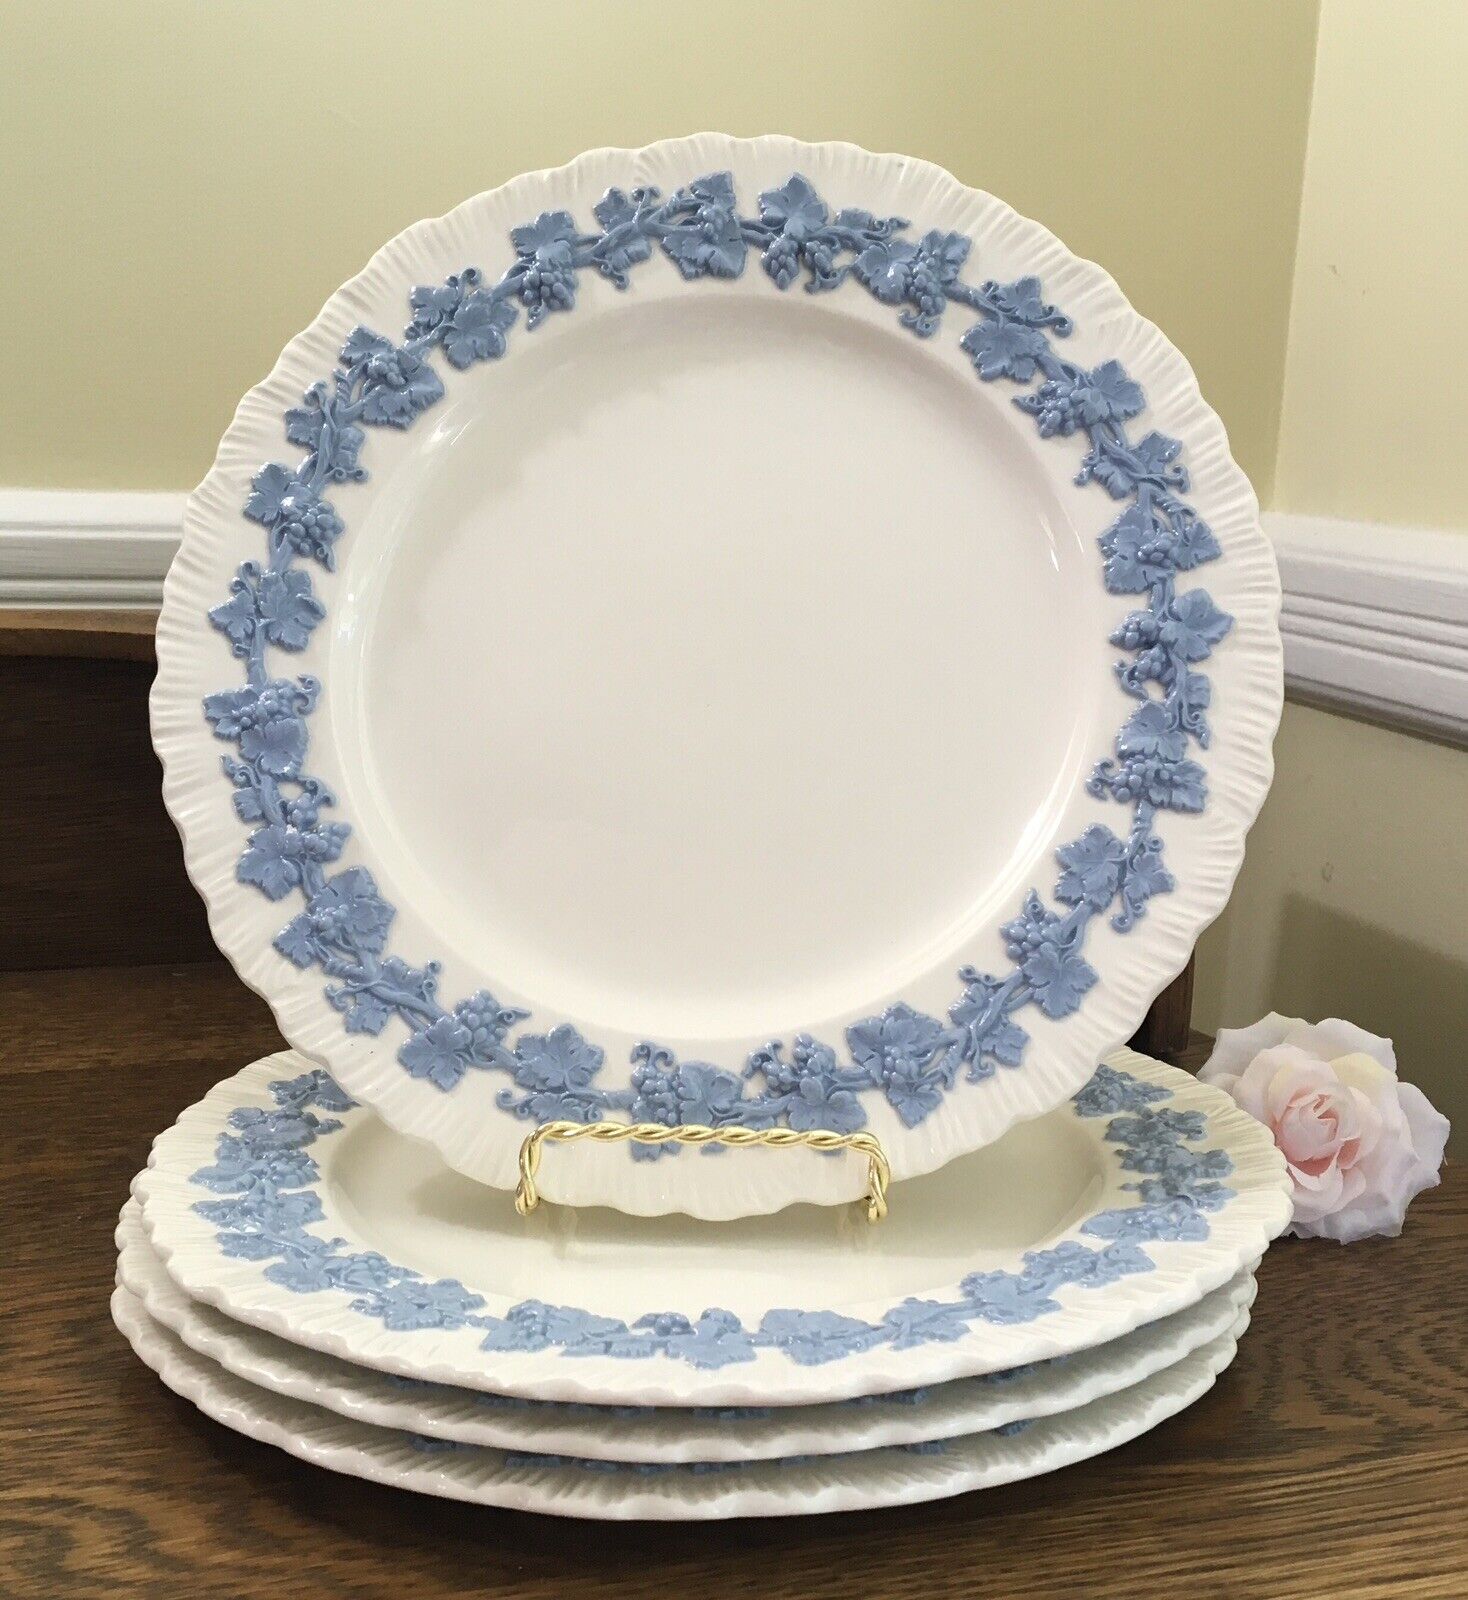 4 Wedgwood Embossed Queensware 9.25” Plates Lavender (Blue) on Cream Shell Edge